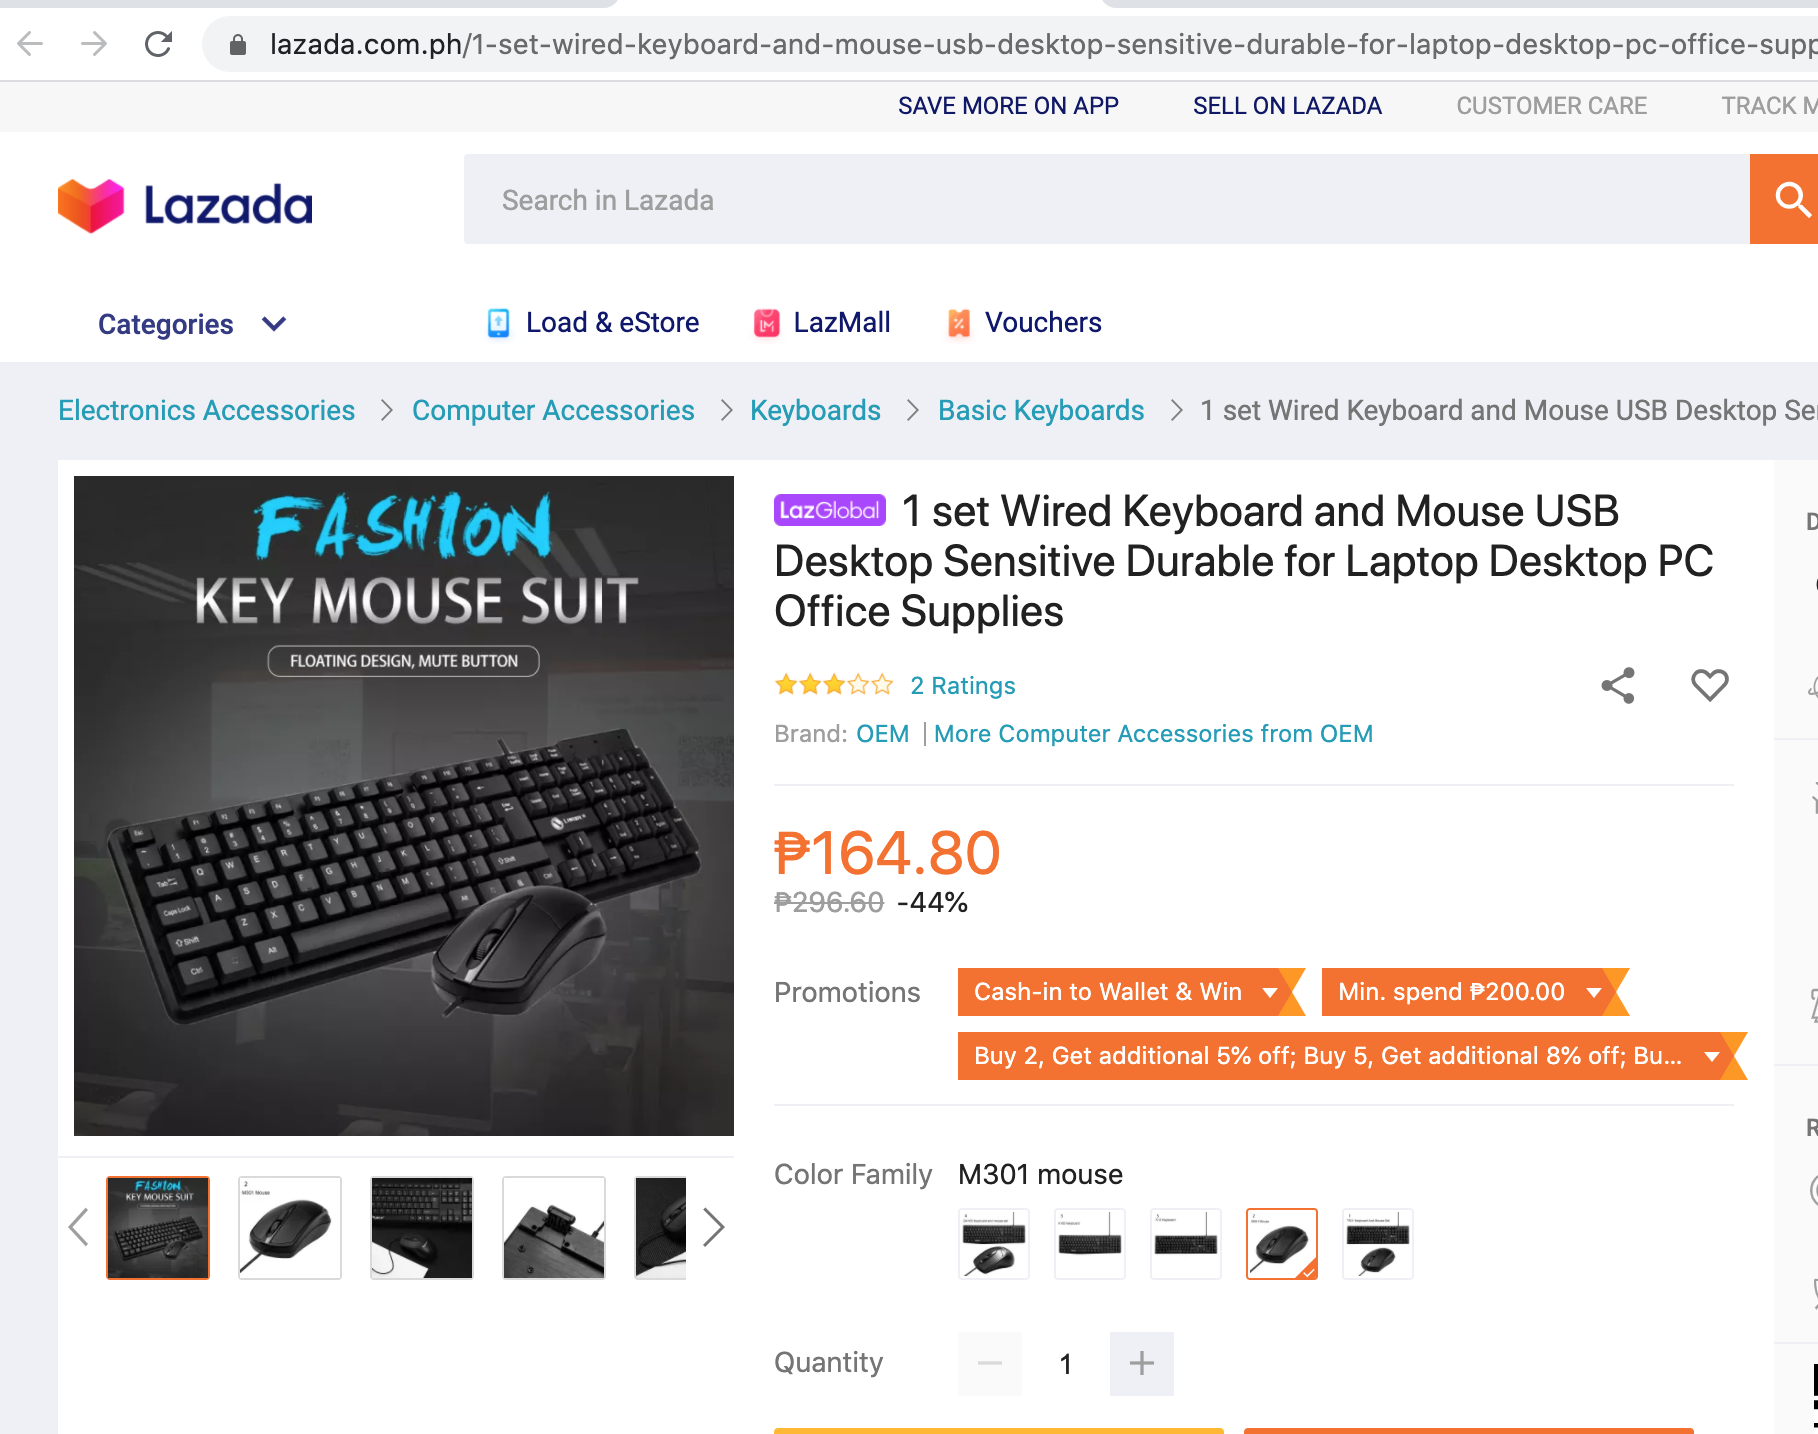 The item shown to me in Lazada which I thought was a mouse and keyboard set 